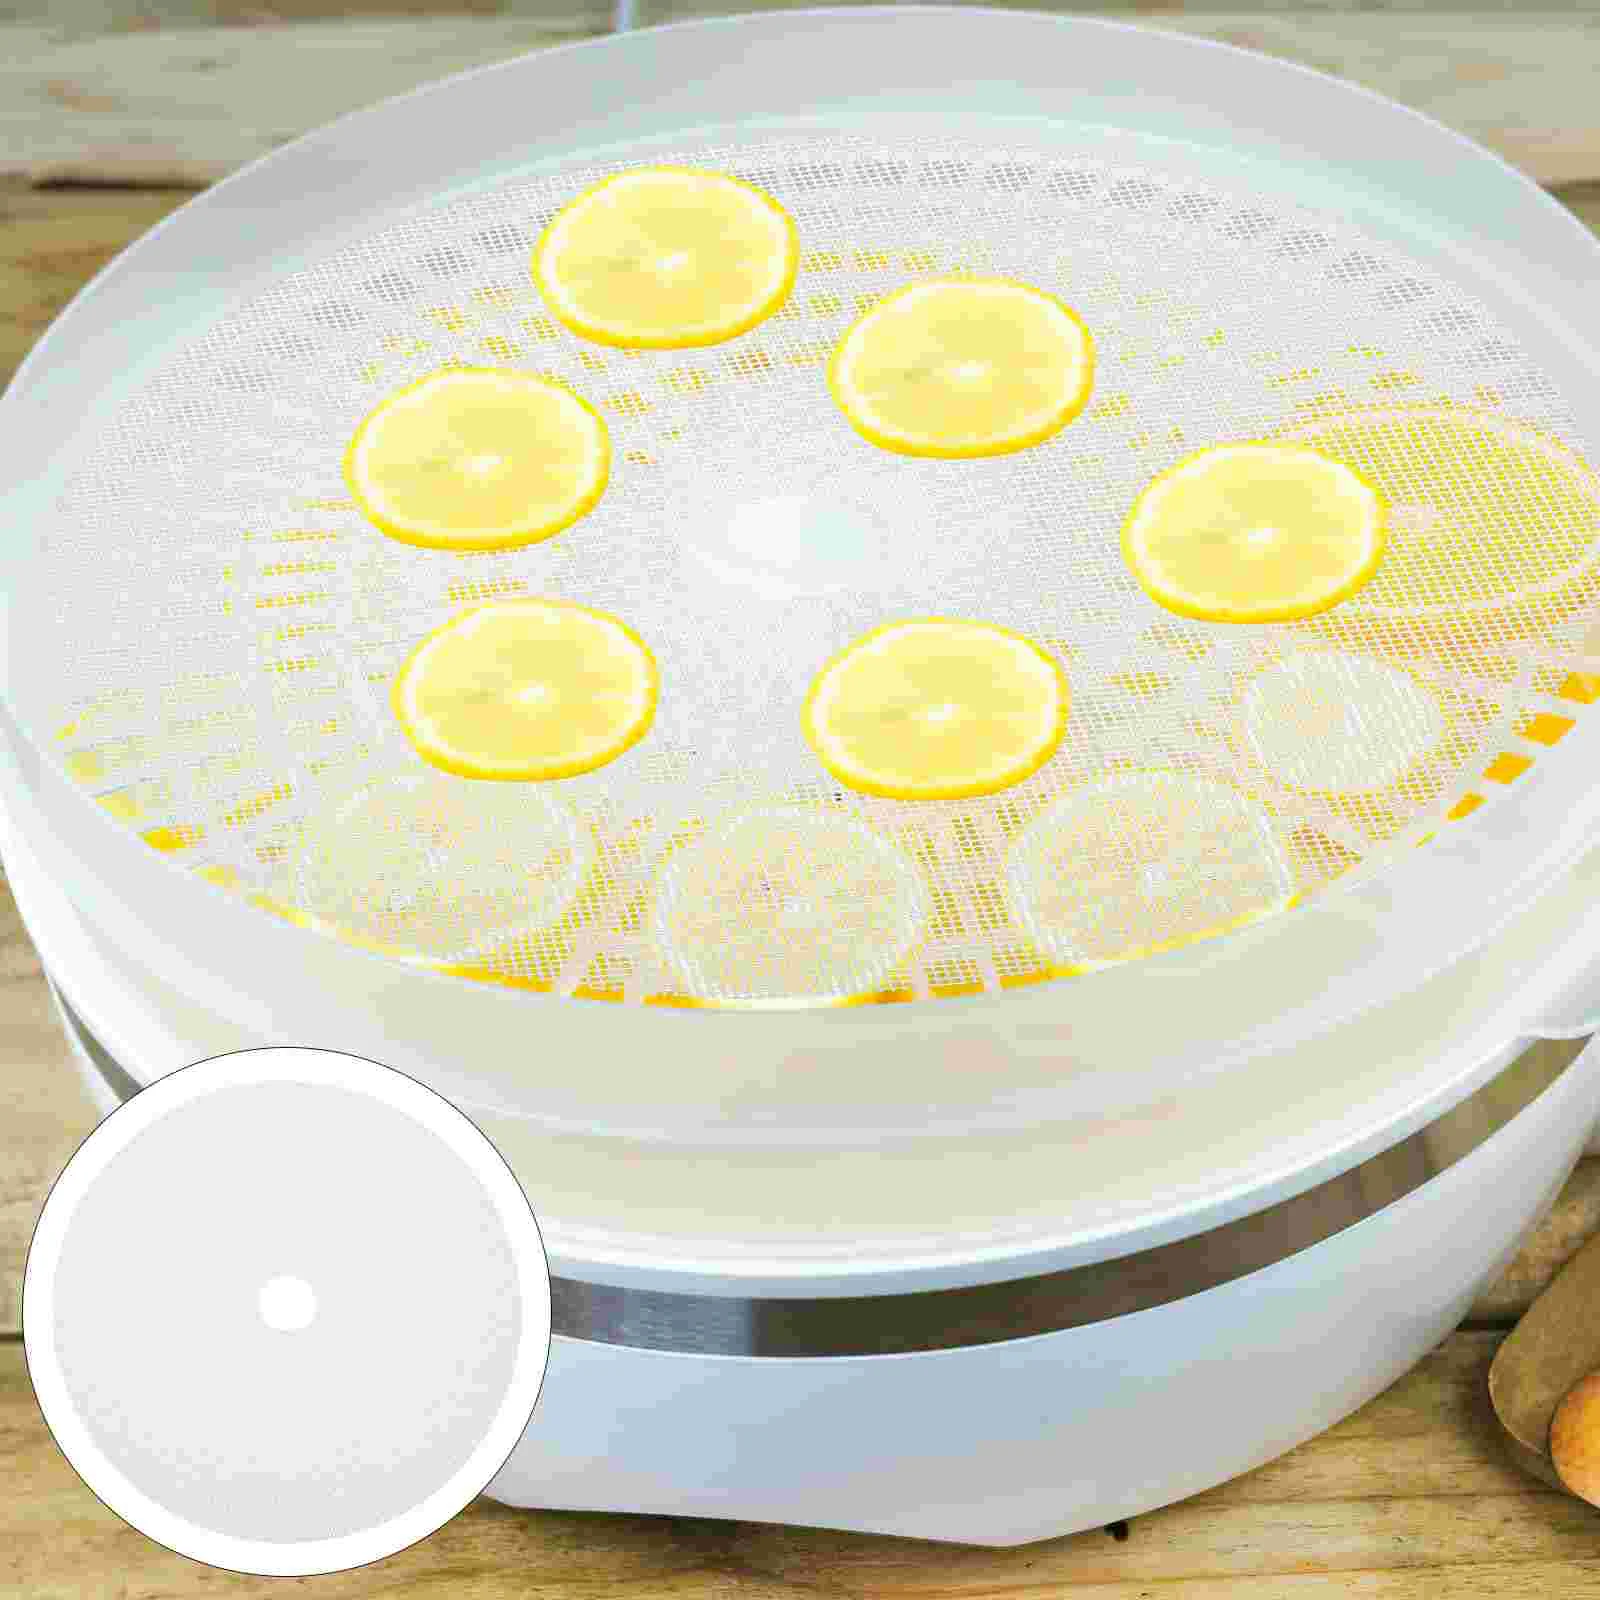 

3pcs Silicone Dehydrator Sheets Round Fruit Drying Mesh Reusable Dehydrator Trays